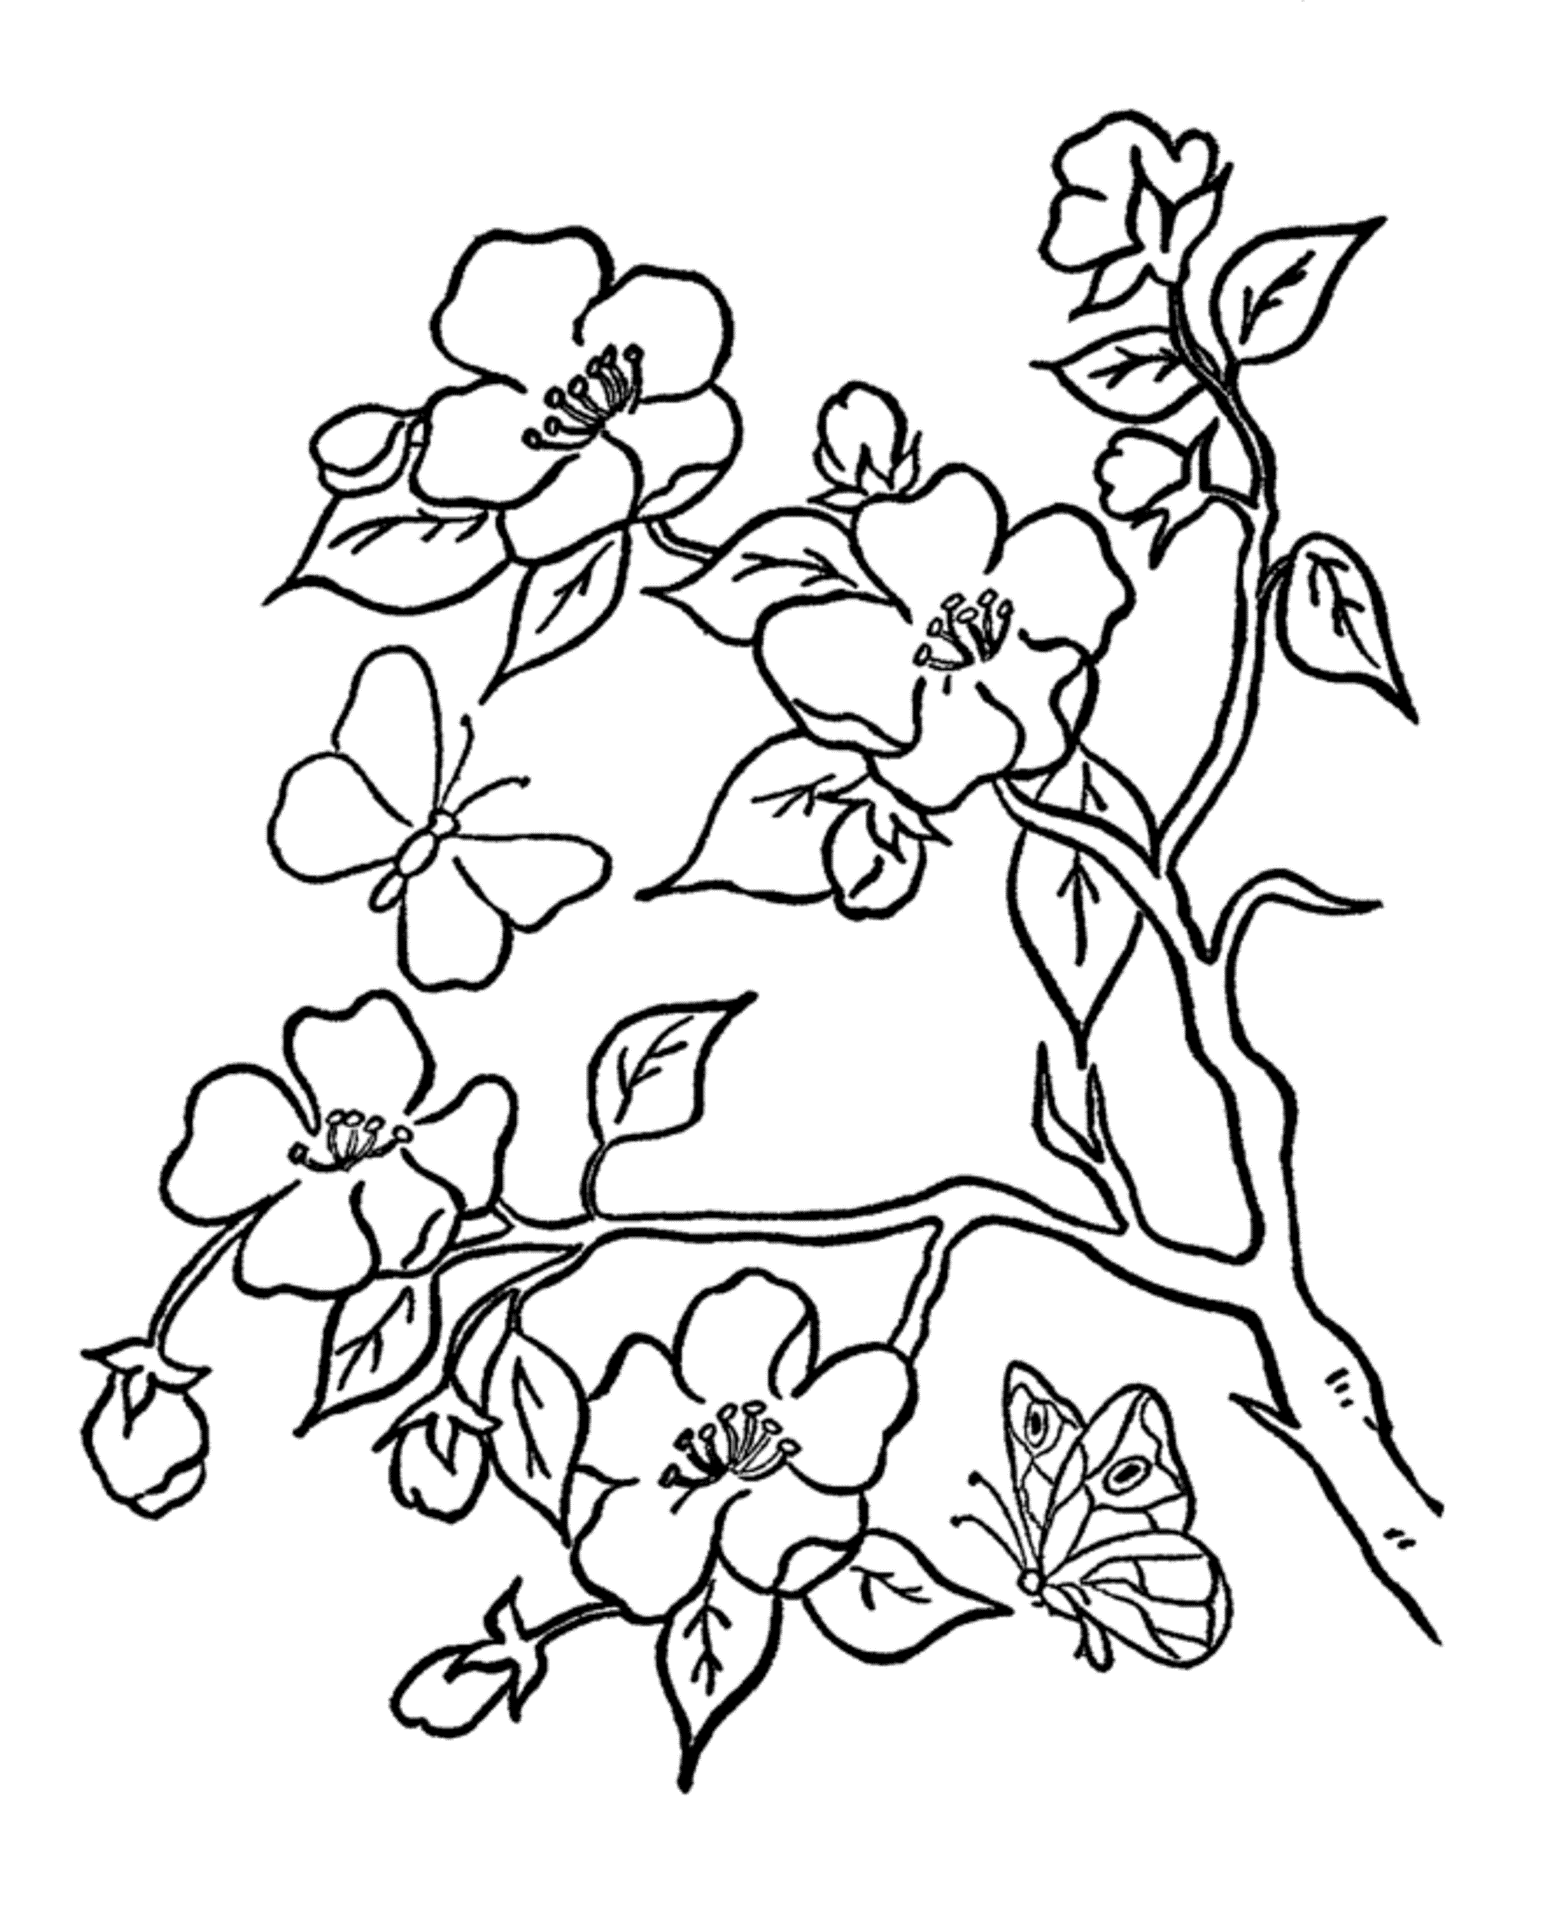 tree flower coloring pages with butterflies Coloring4free